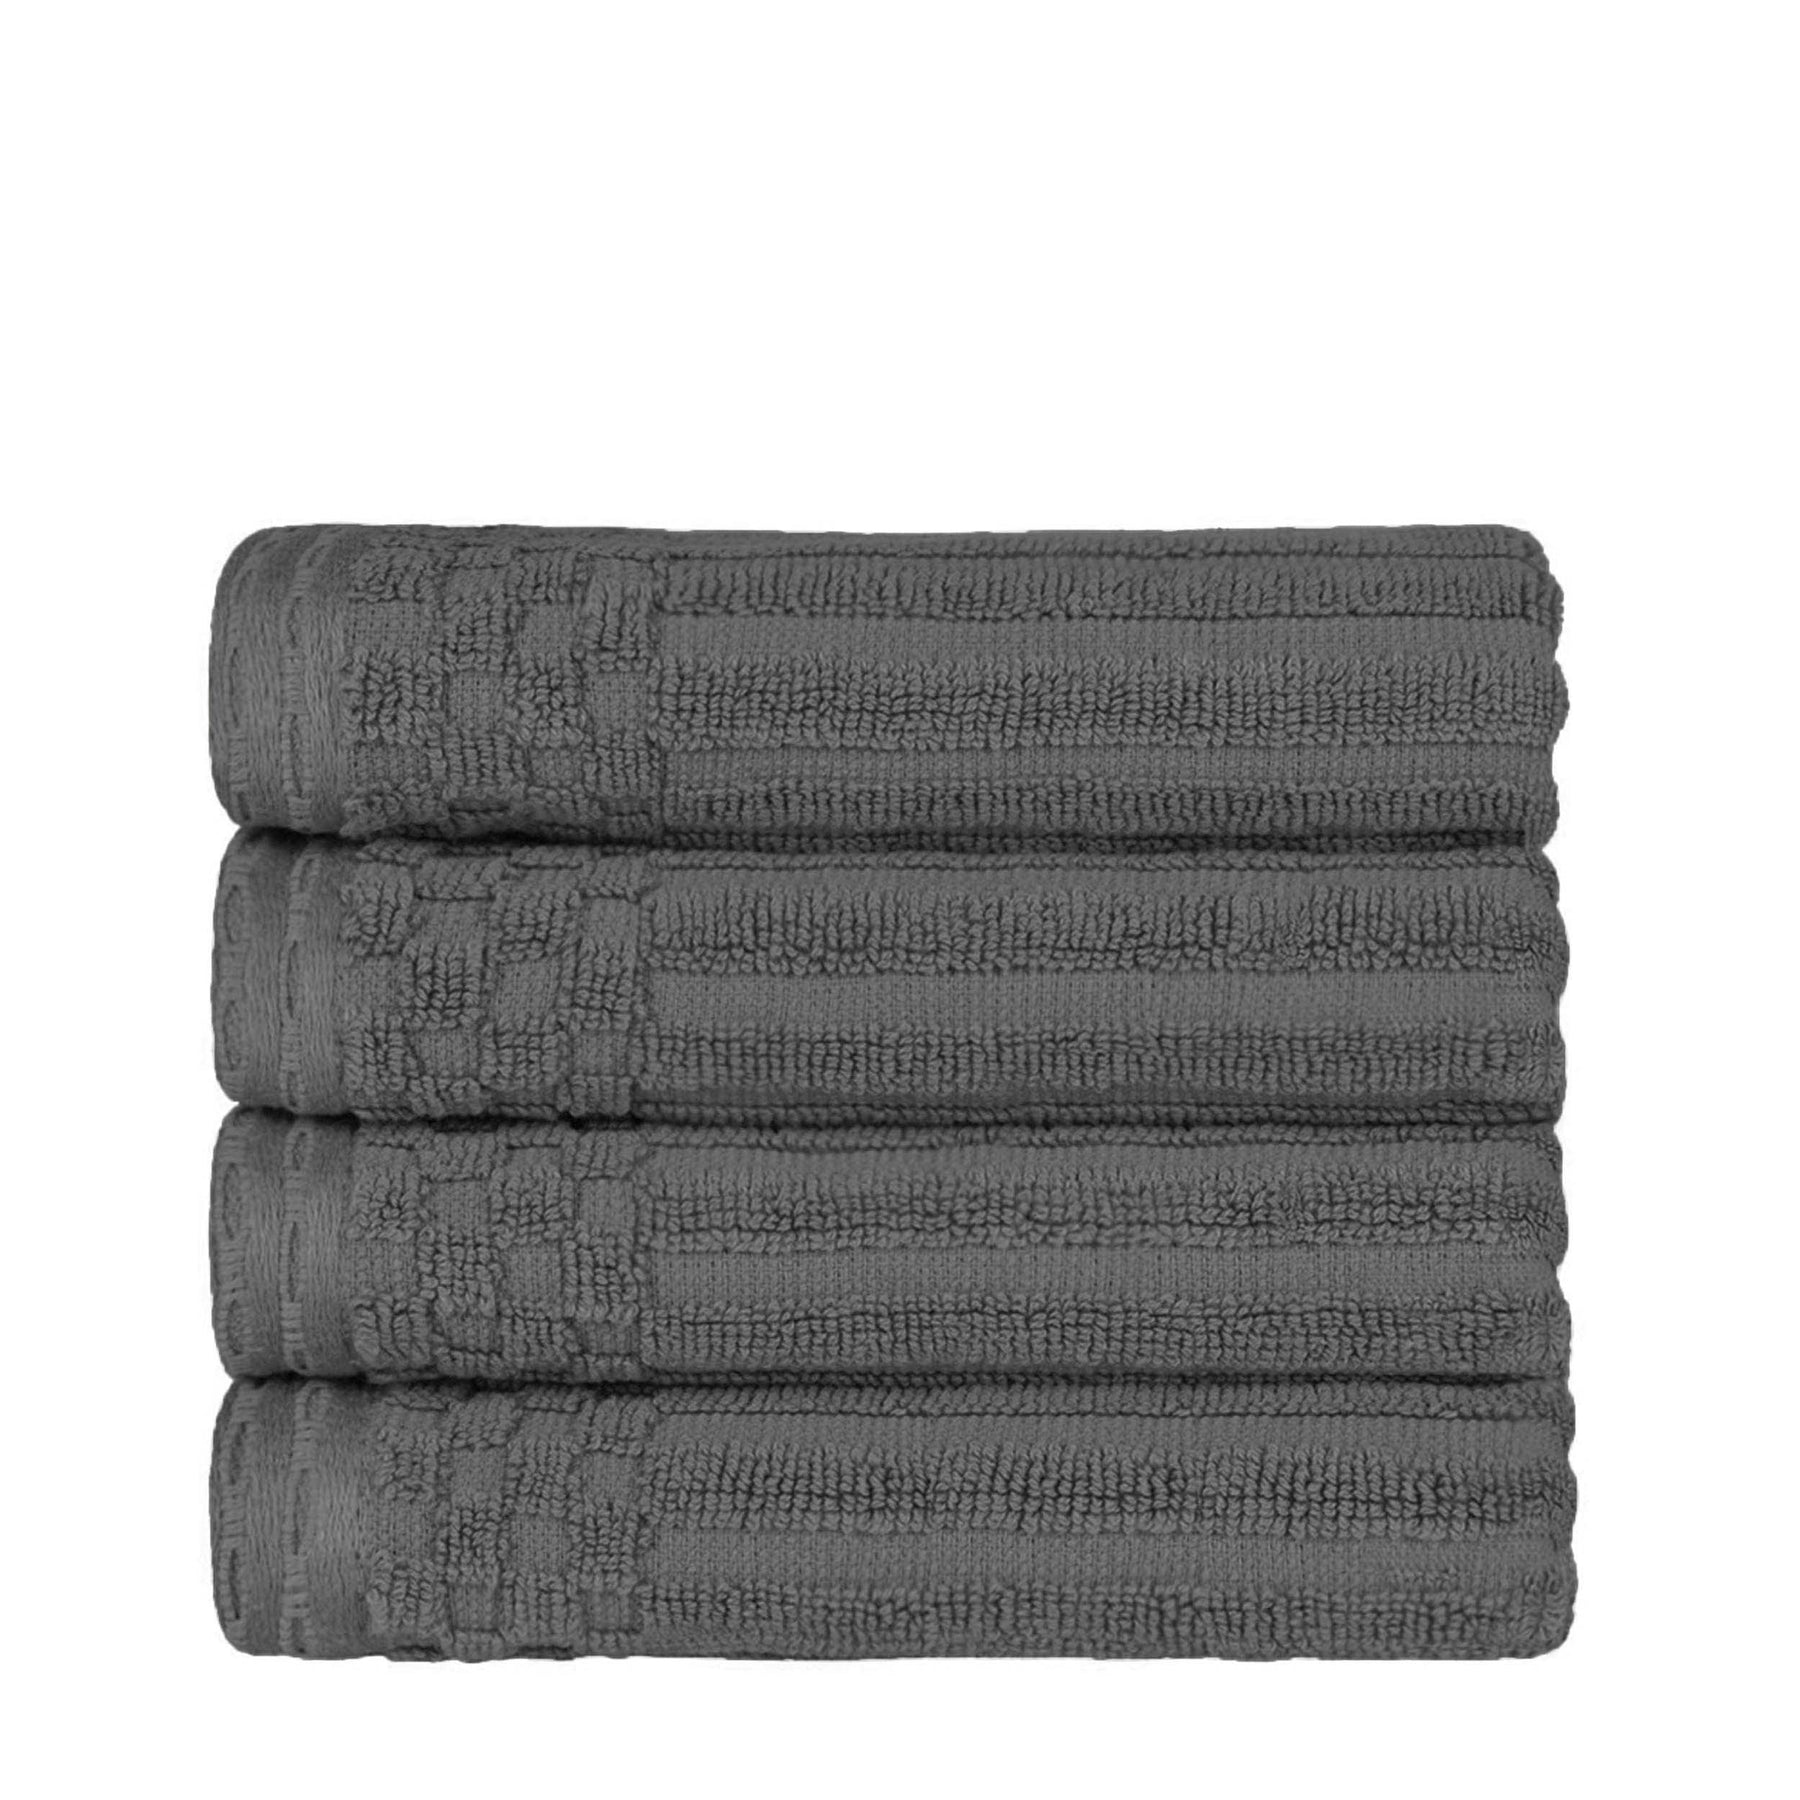 Ribbed Textured Cotton Ultra-Absorbent 4 Piece Hand Towel Set - Charcoal